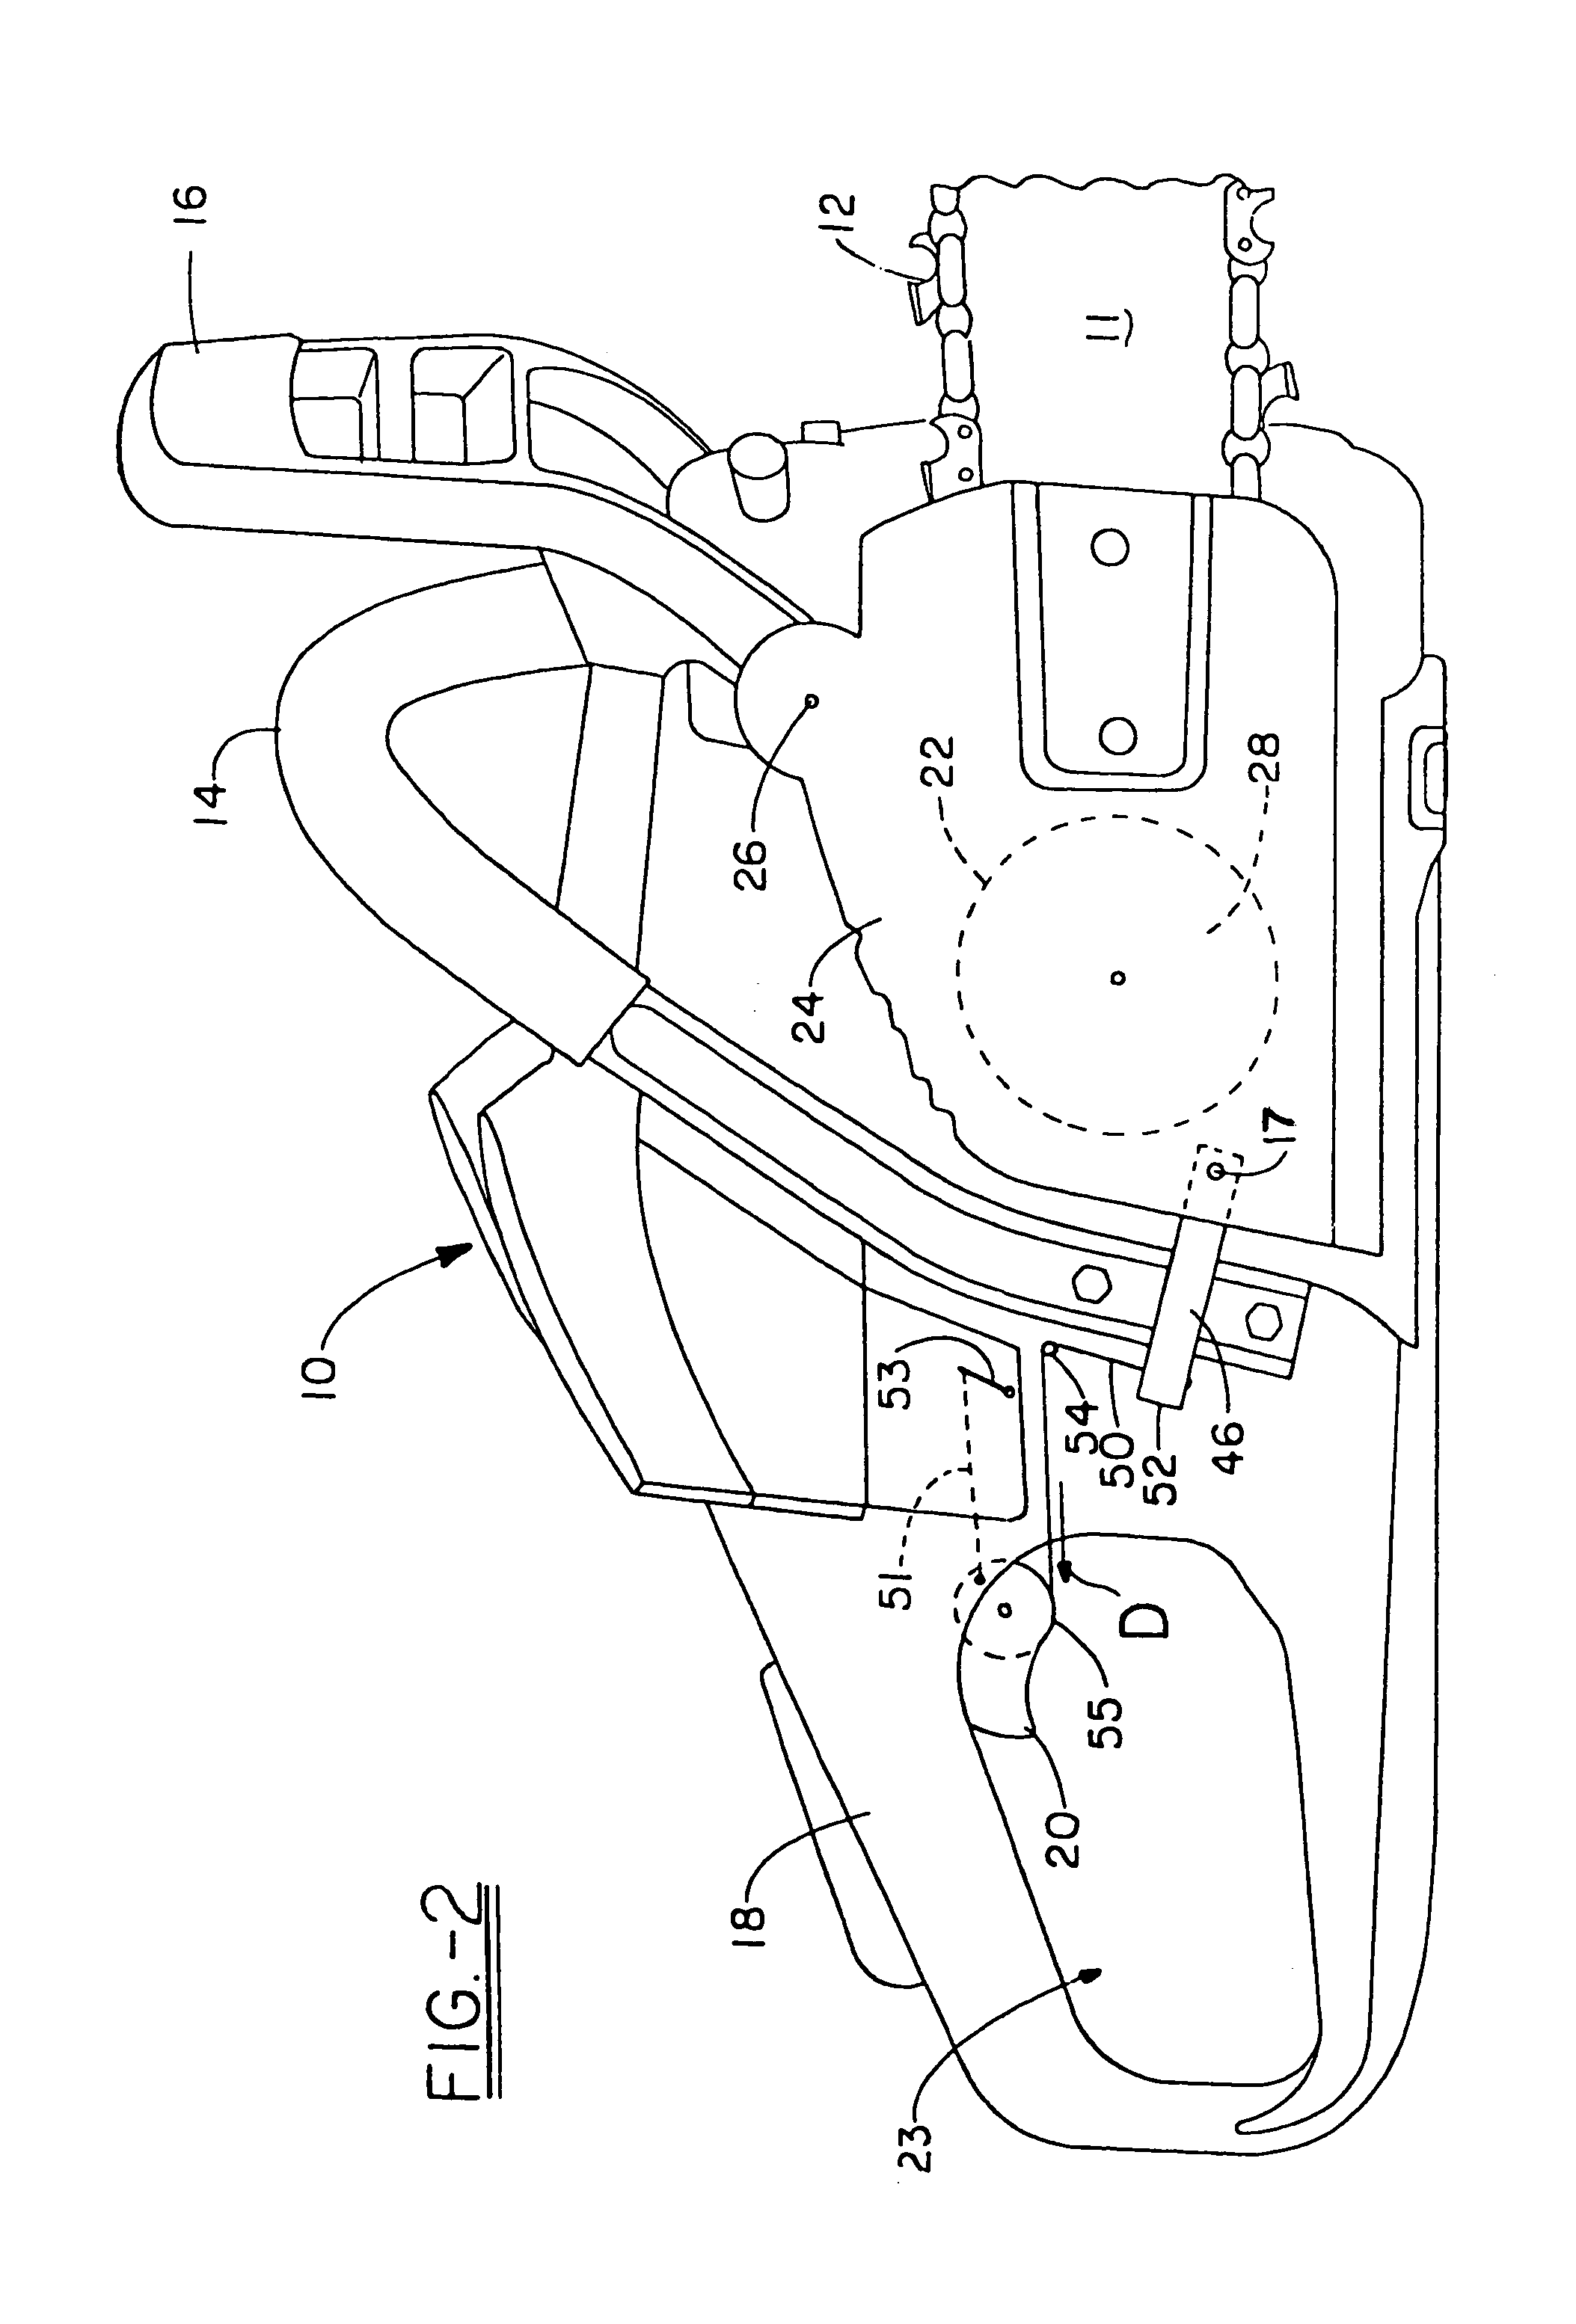 Chainsaw throttle and brake mechanisms